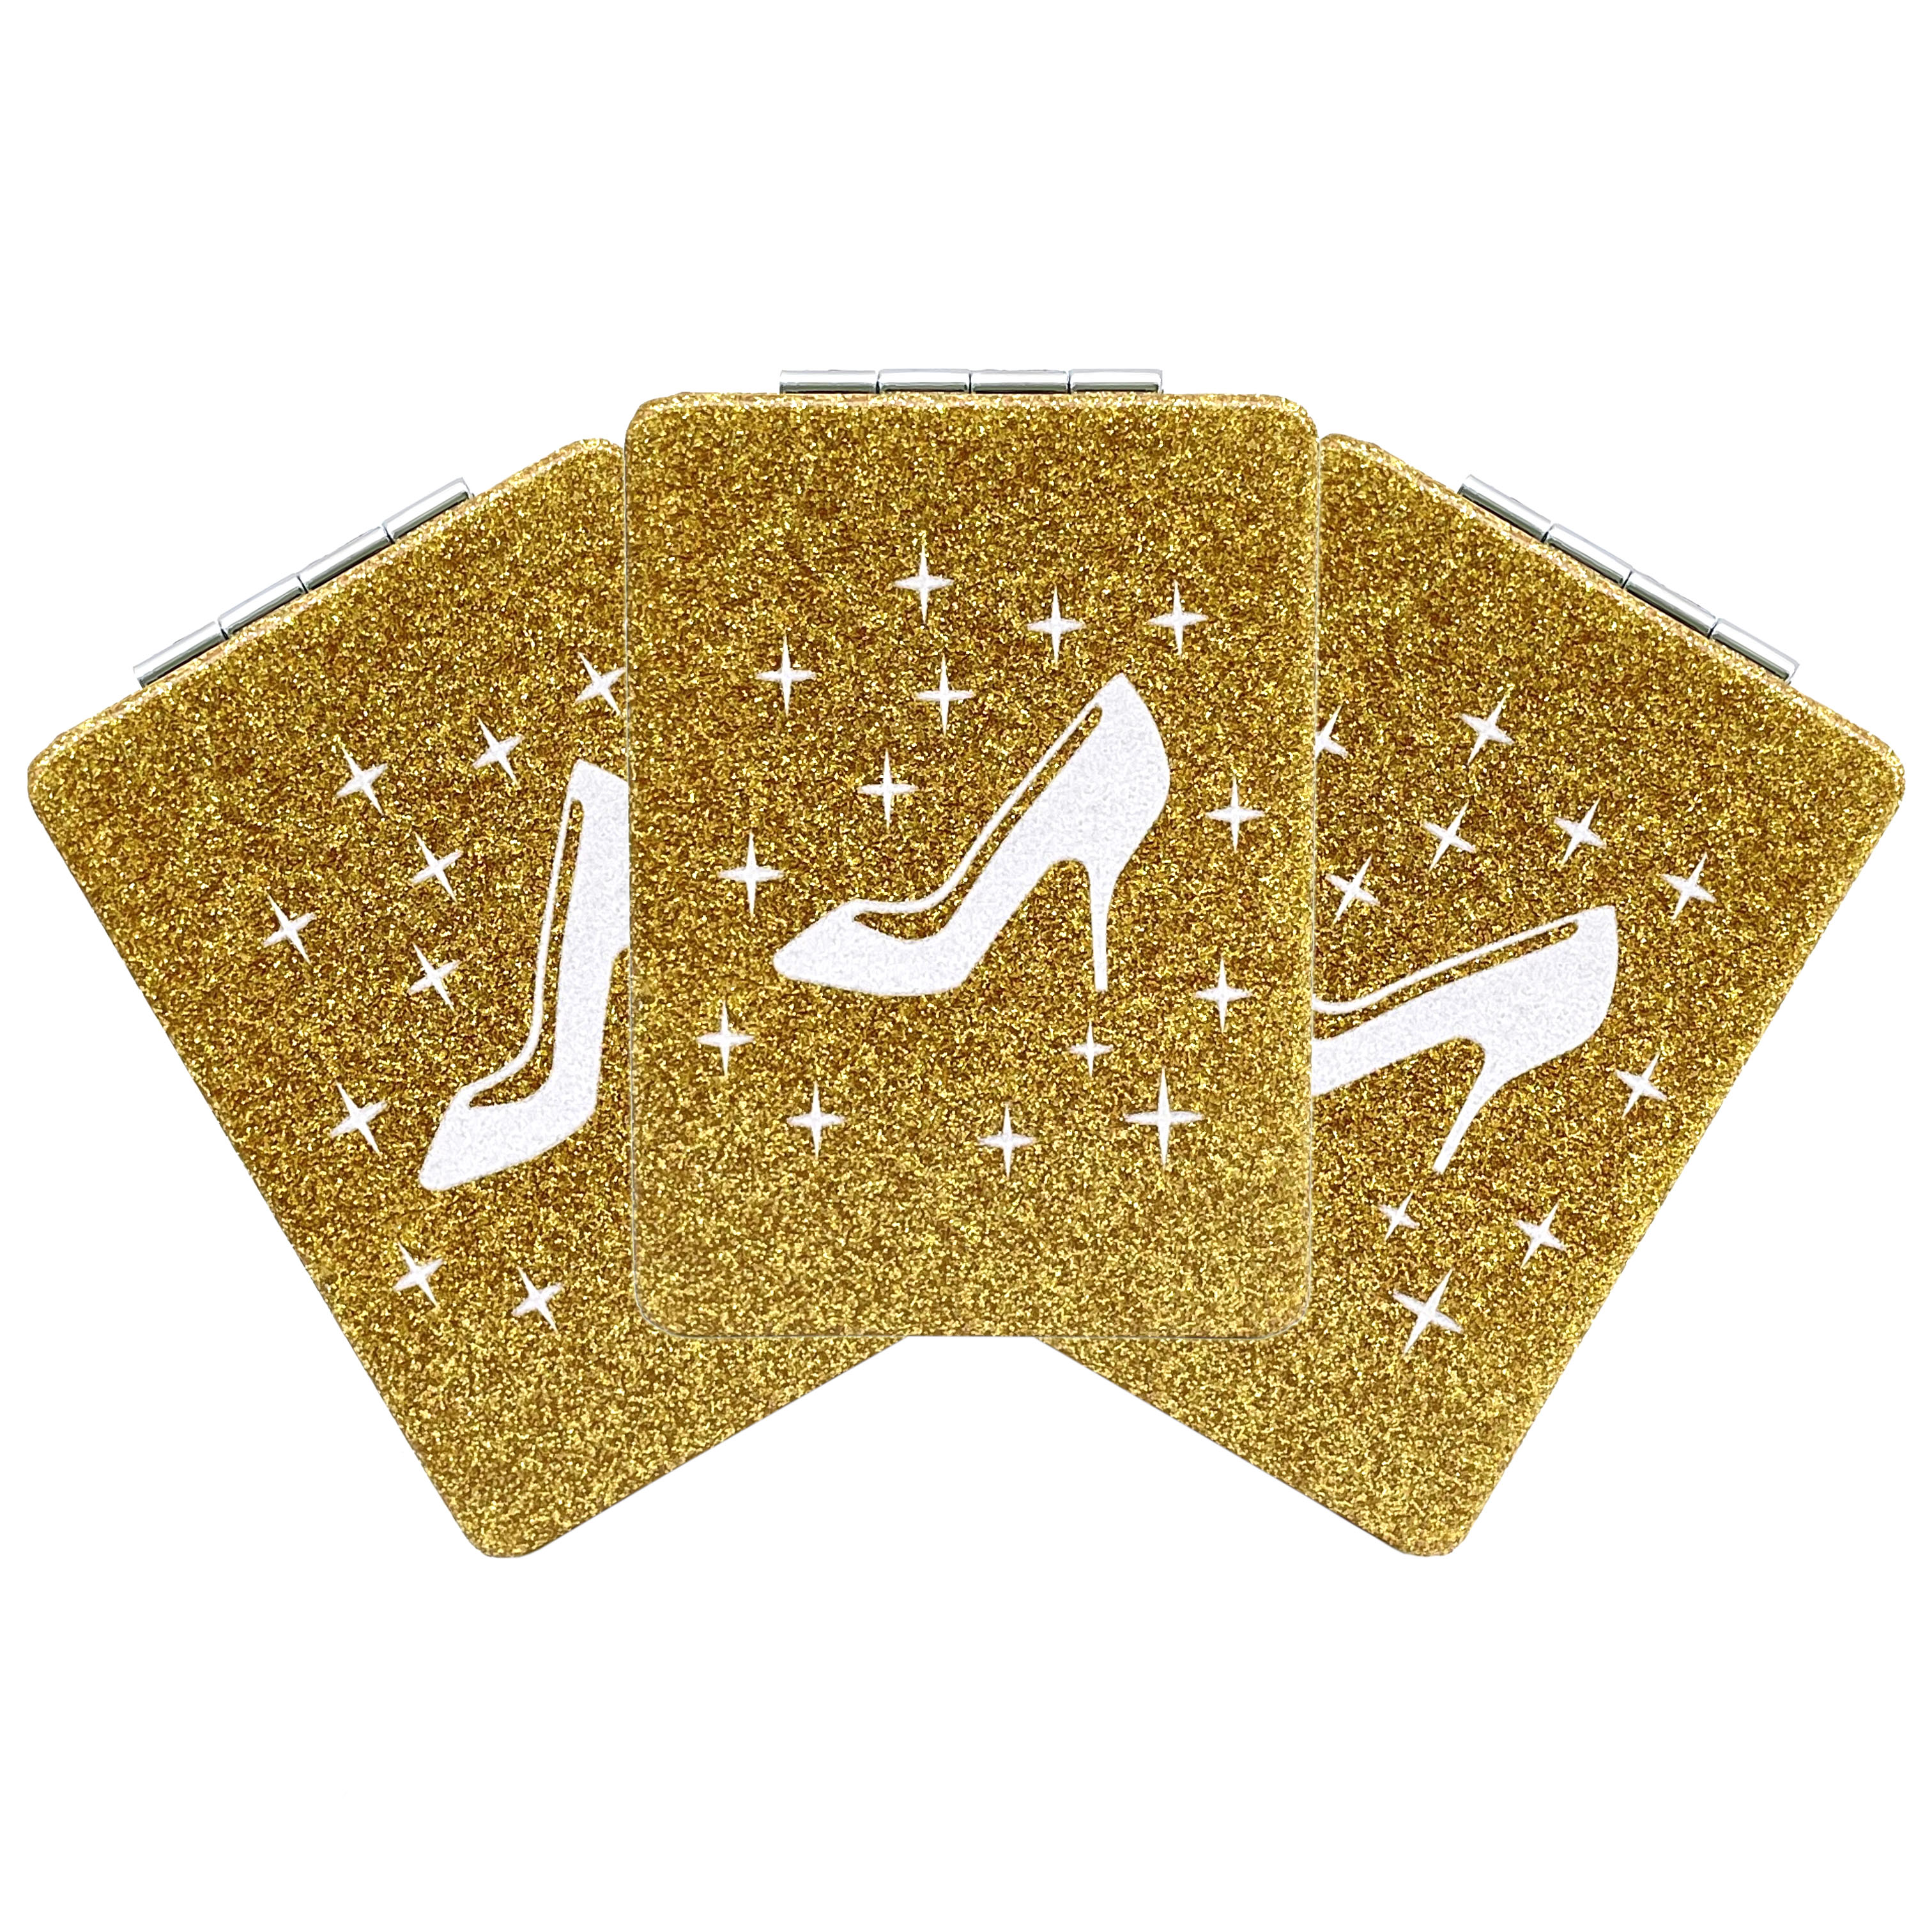 

12 Pcs Sweet 15 High Heel Gold Compact Mirror Square Glitter Pu Leather Makeup Mirror Recuerdos De Mis Aos Birthday Party Favors For Girl